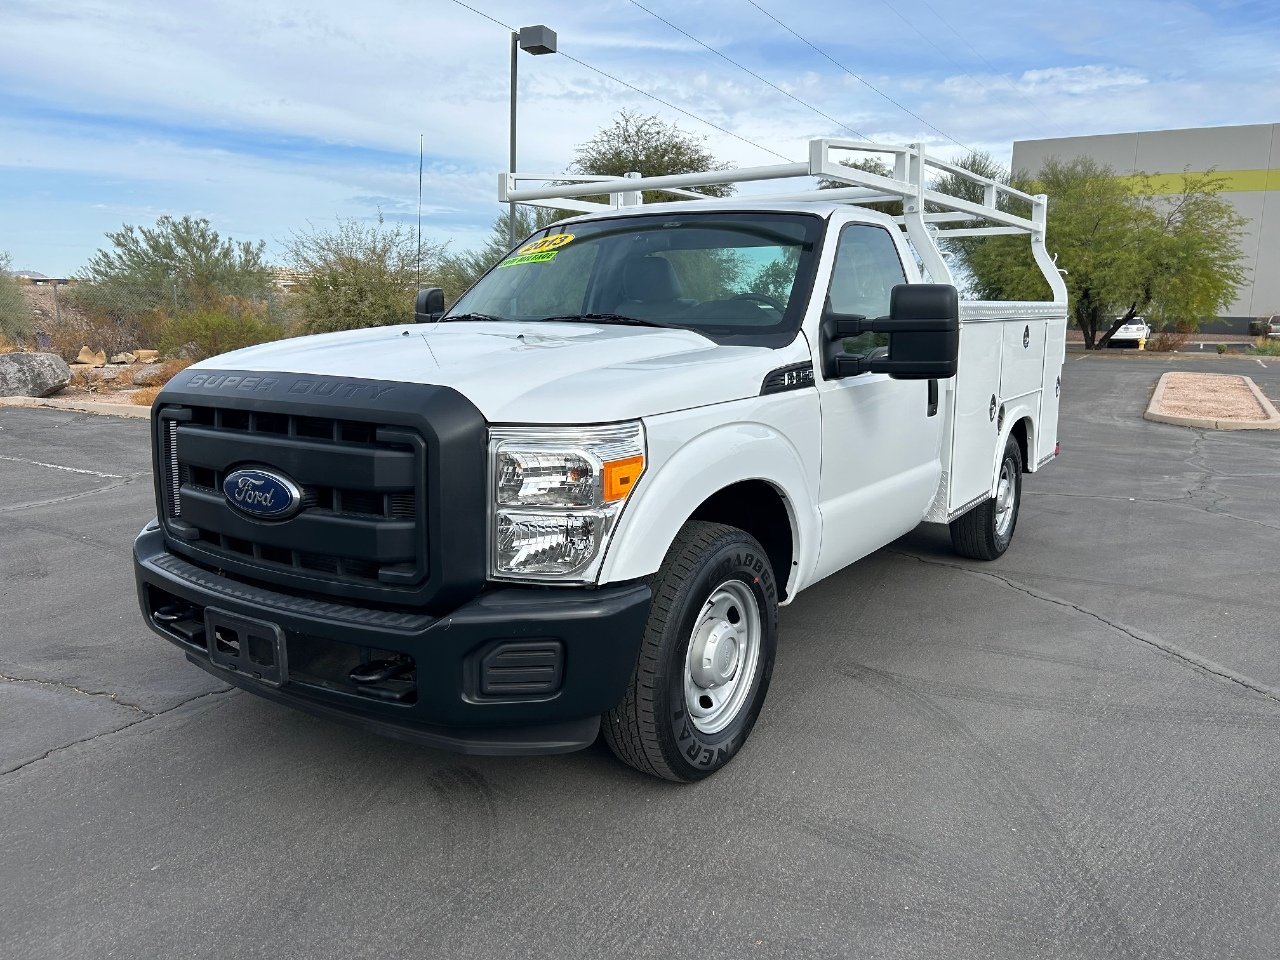 USED 2013 FORD F-250 SERVICE - UTILITY TRUCK #3223